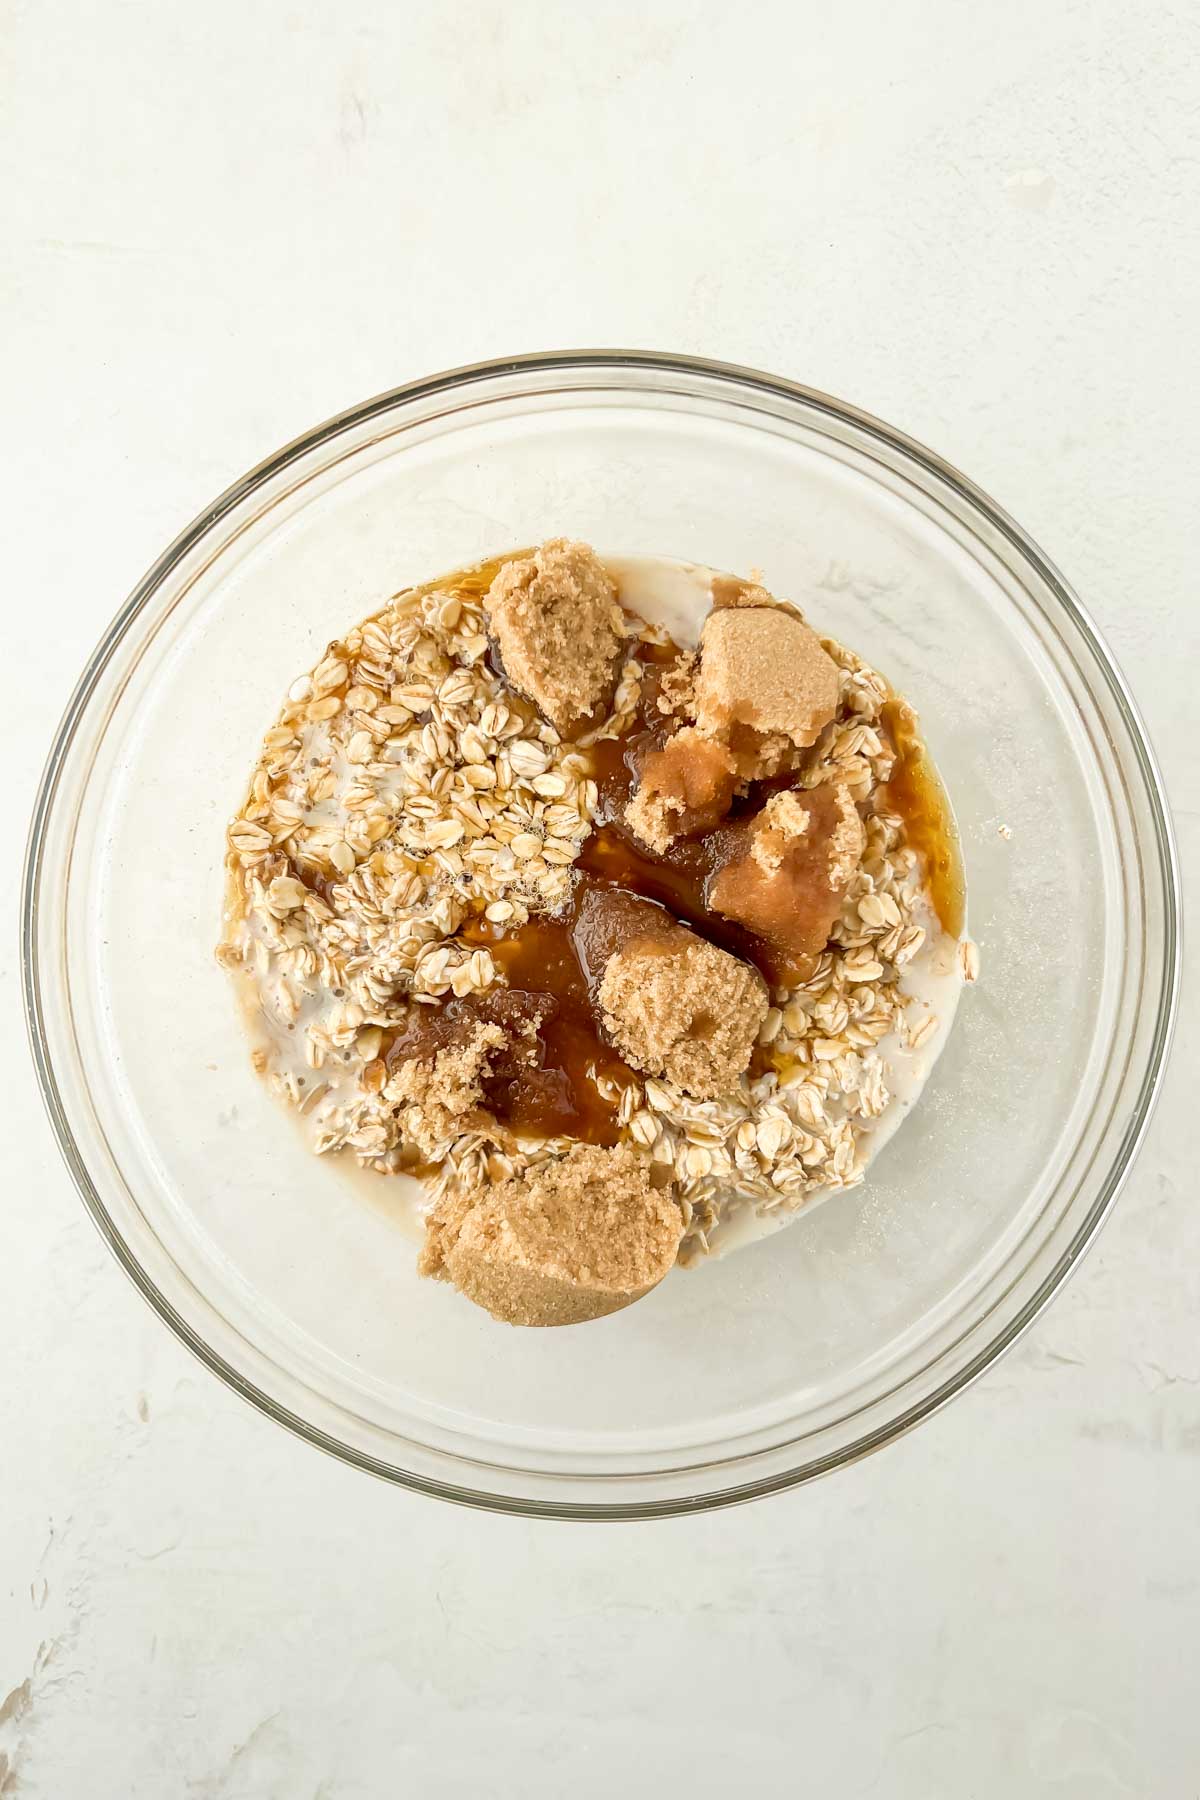 brown sugar and oats in glass mixing bowl.